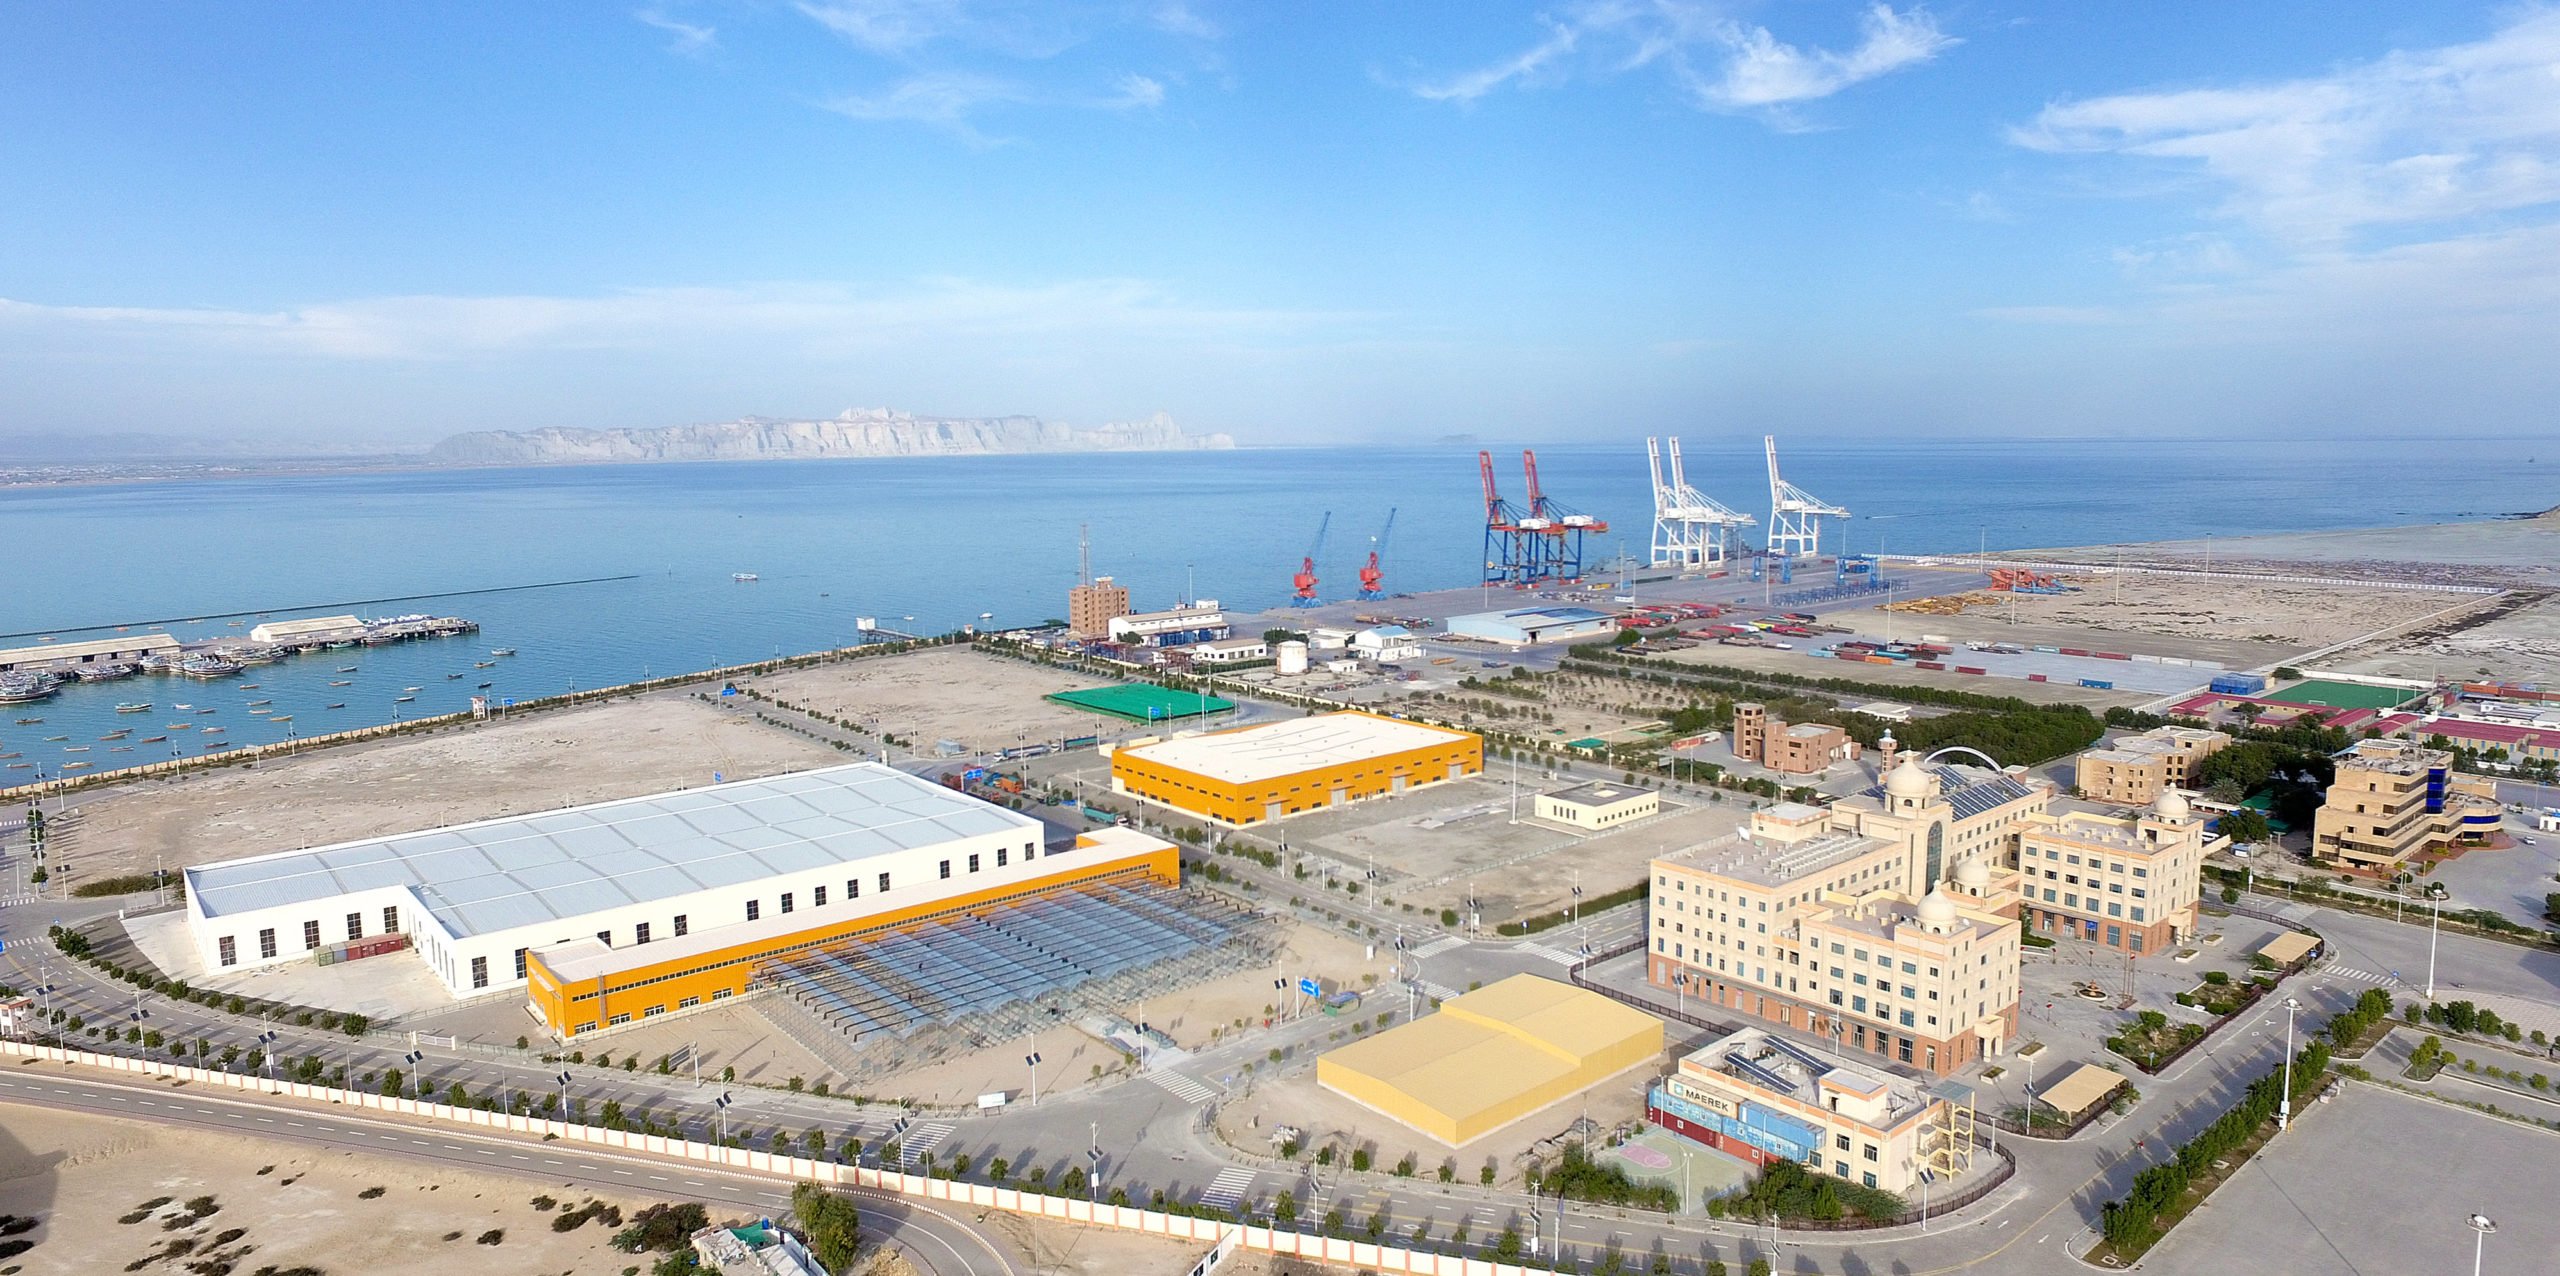 <p>The Gwadar Free Zone and port area. Business was slow at the port when The Third Pole visited in April 2021. (Image: Shabbir Ahmed)</p>